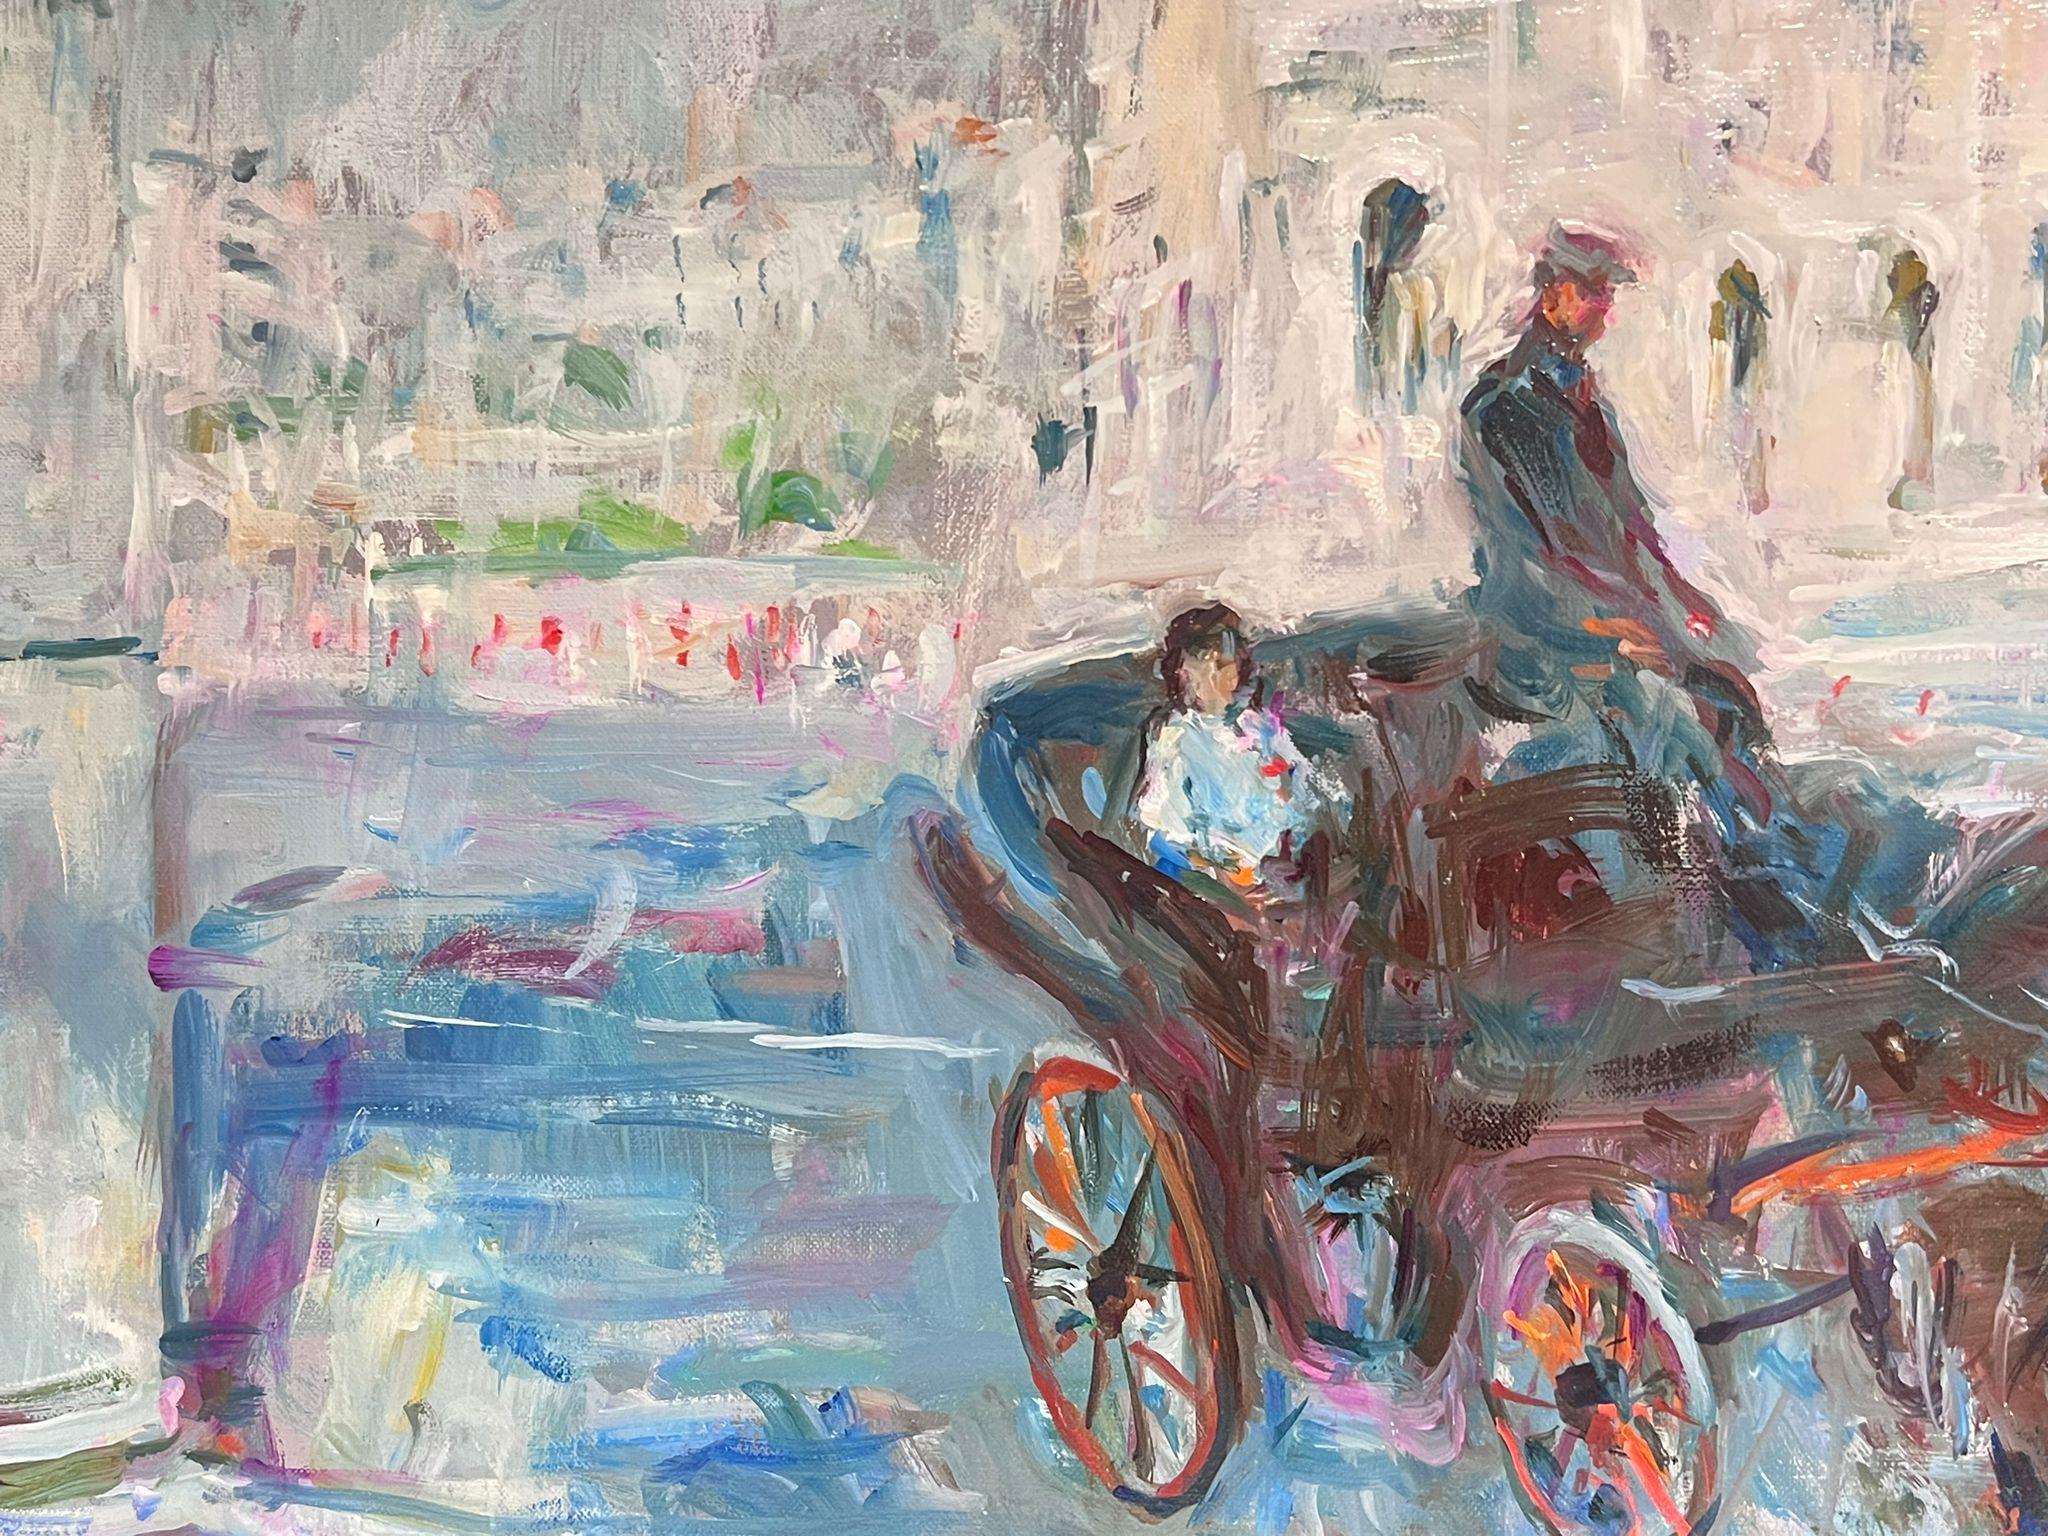 Promenade en Rome
by Max Agostini (1914-1997)
signed and also titled verso
oil on canvas, unframed
painting: 24 x 32 inches
provenance: private collection, Paris
condition: very good and sound condition